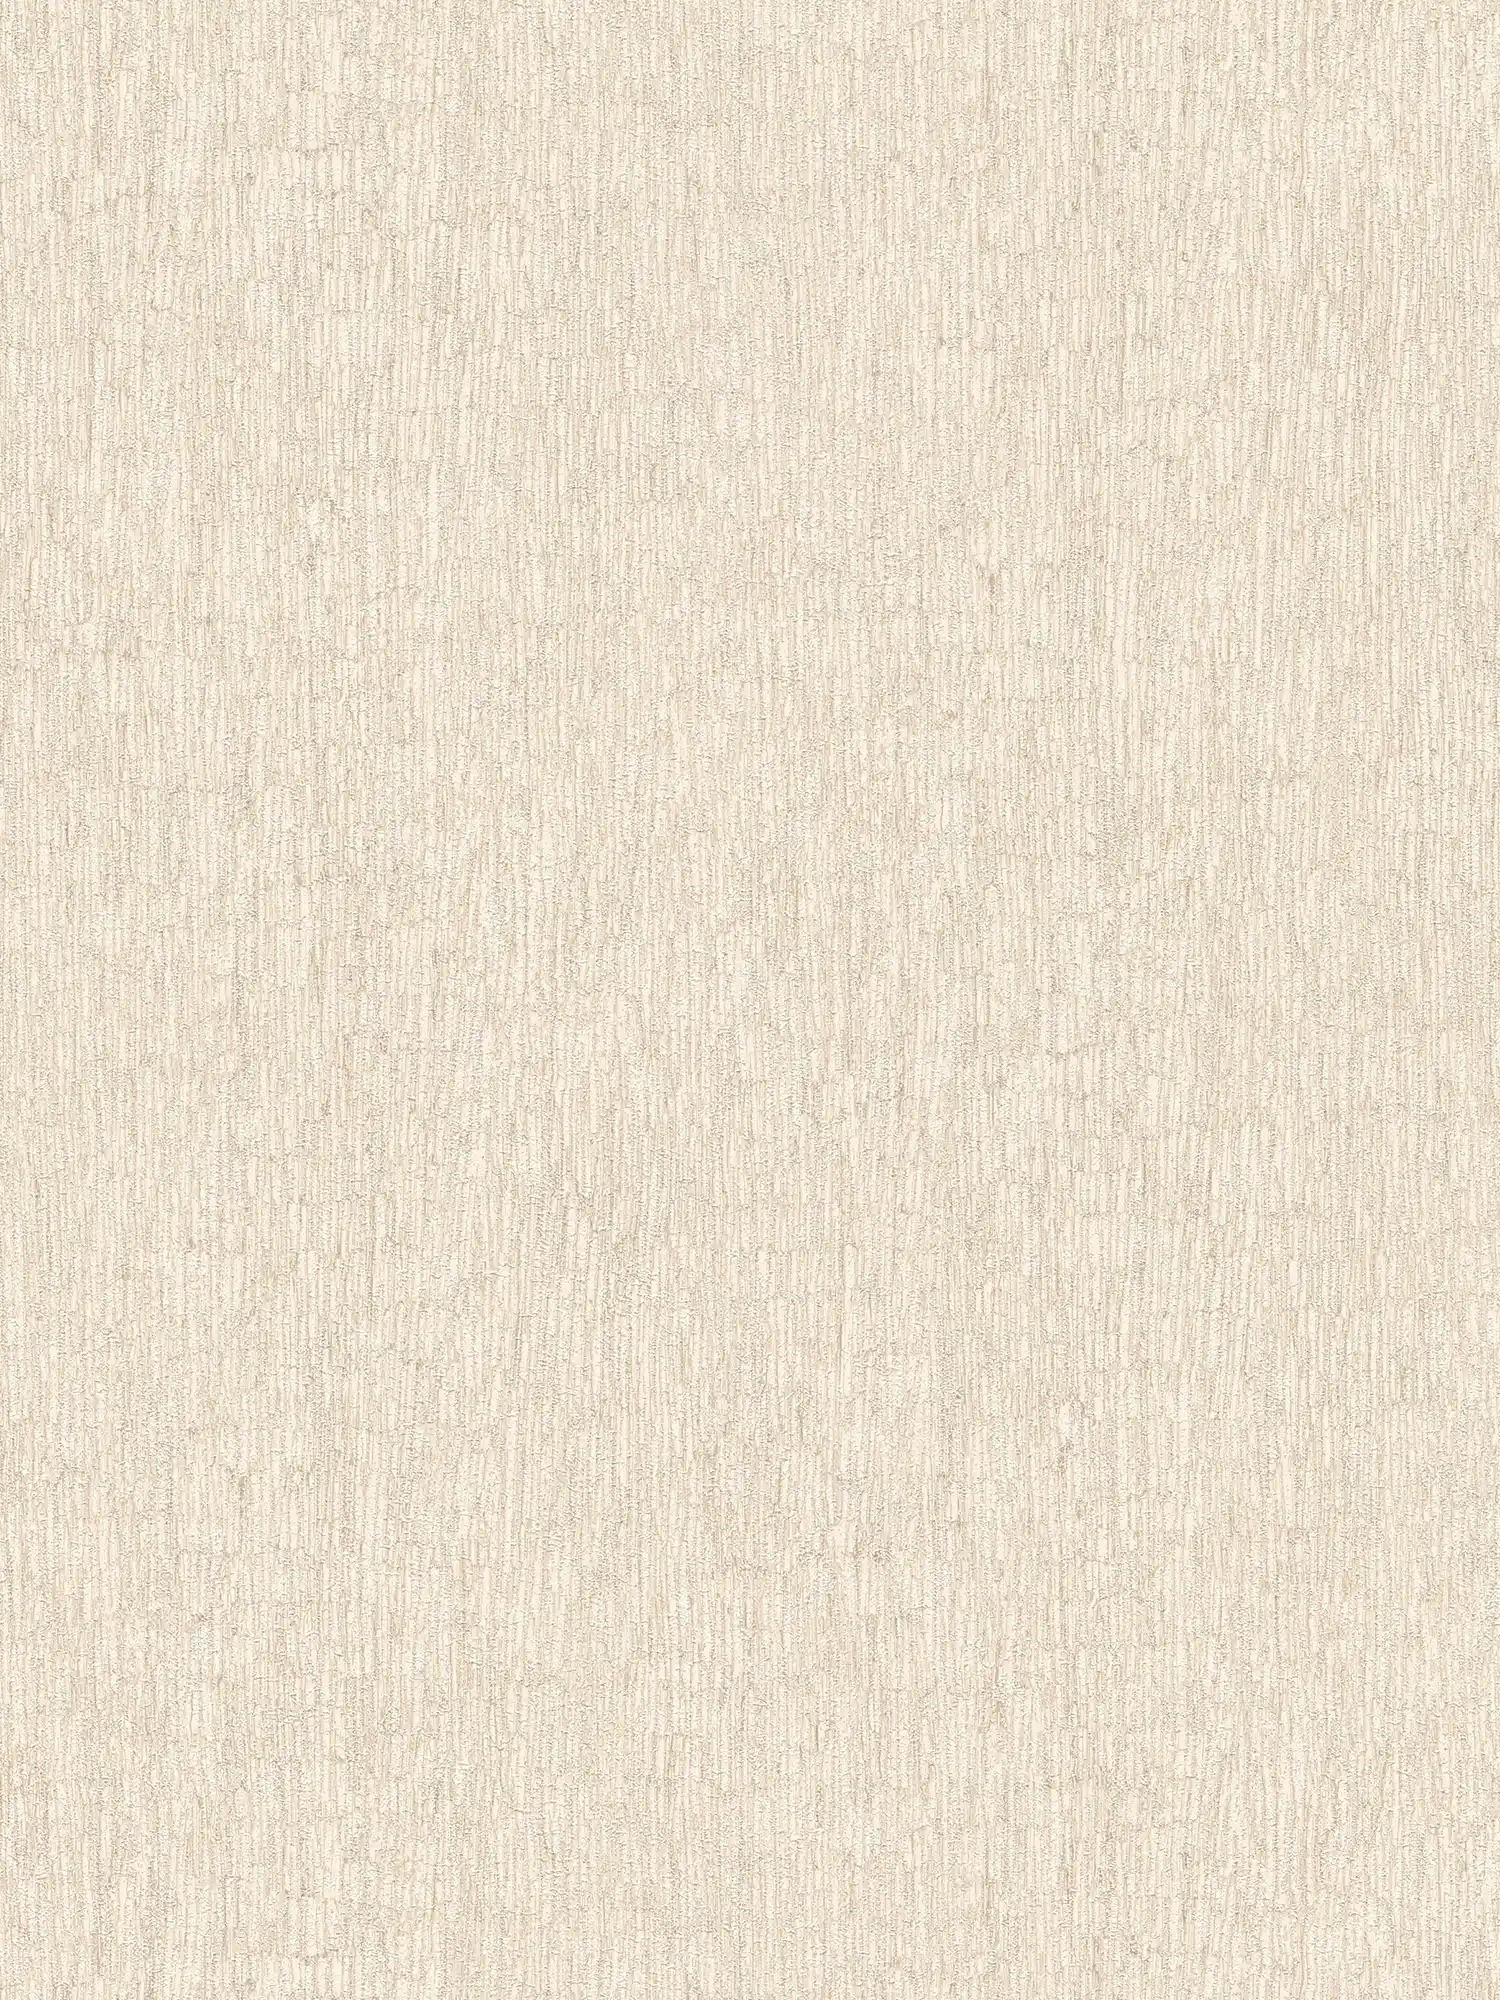         Non-woven wallpaper in plaster look, lightly textured - beige, cream, silver
    